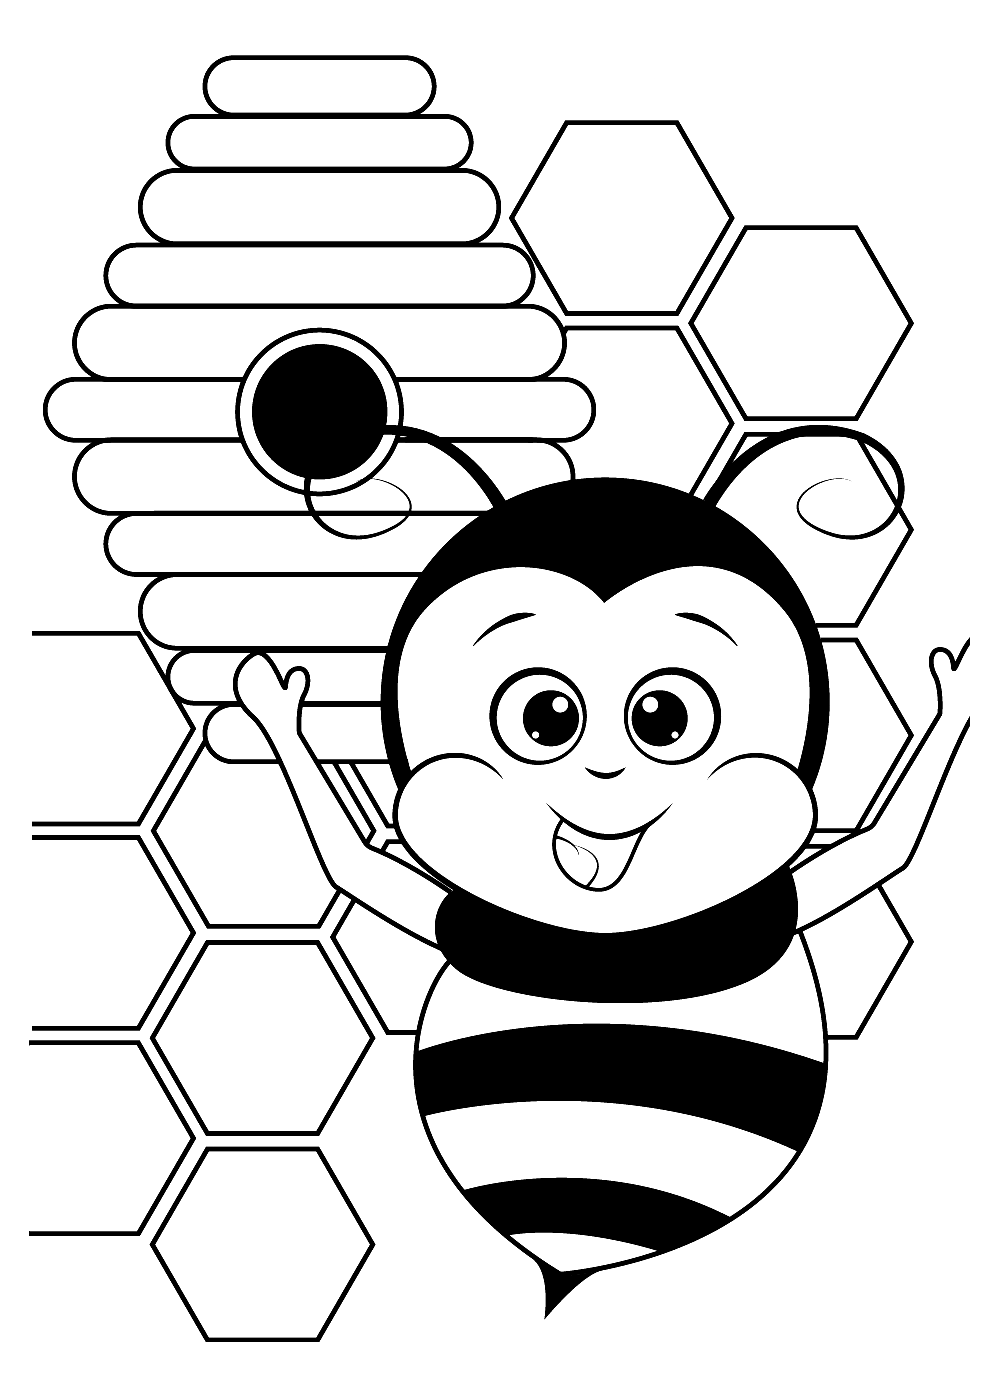 Worker Bee with Glitter Eyes Coloring Page